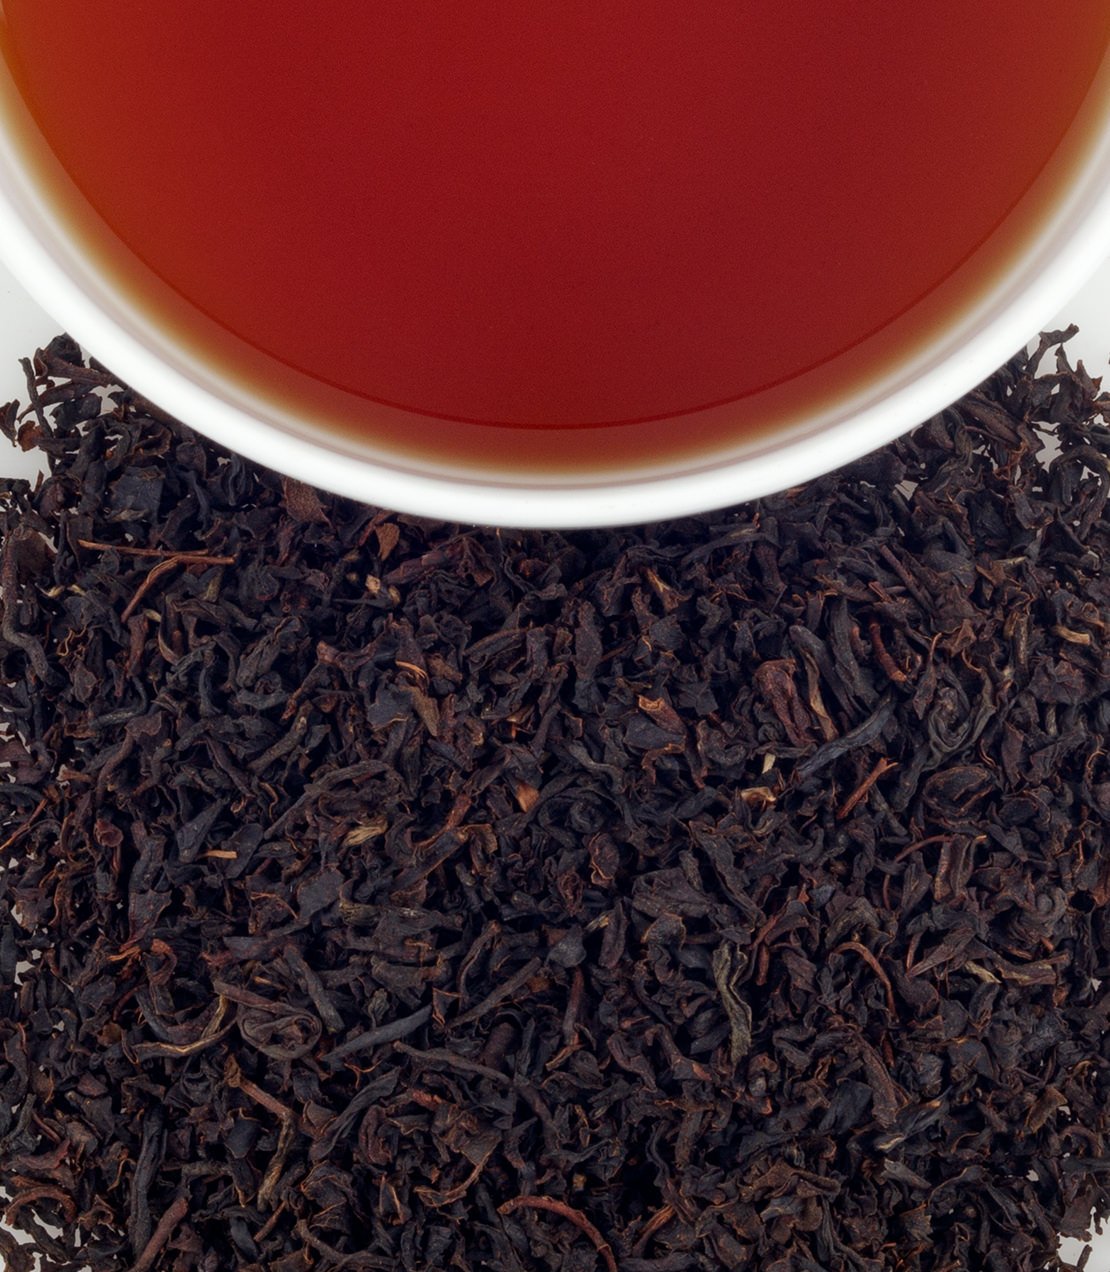 Organic Earl Grey - Black tea with natural bergamot from Italy, organic certified - Harney & Sons Fine Teas Europe